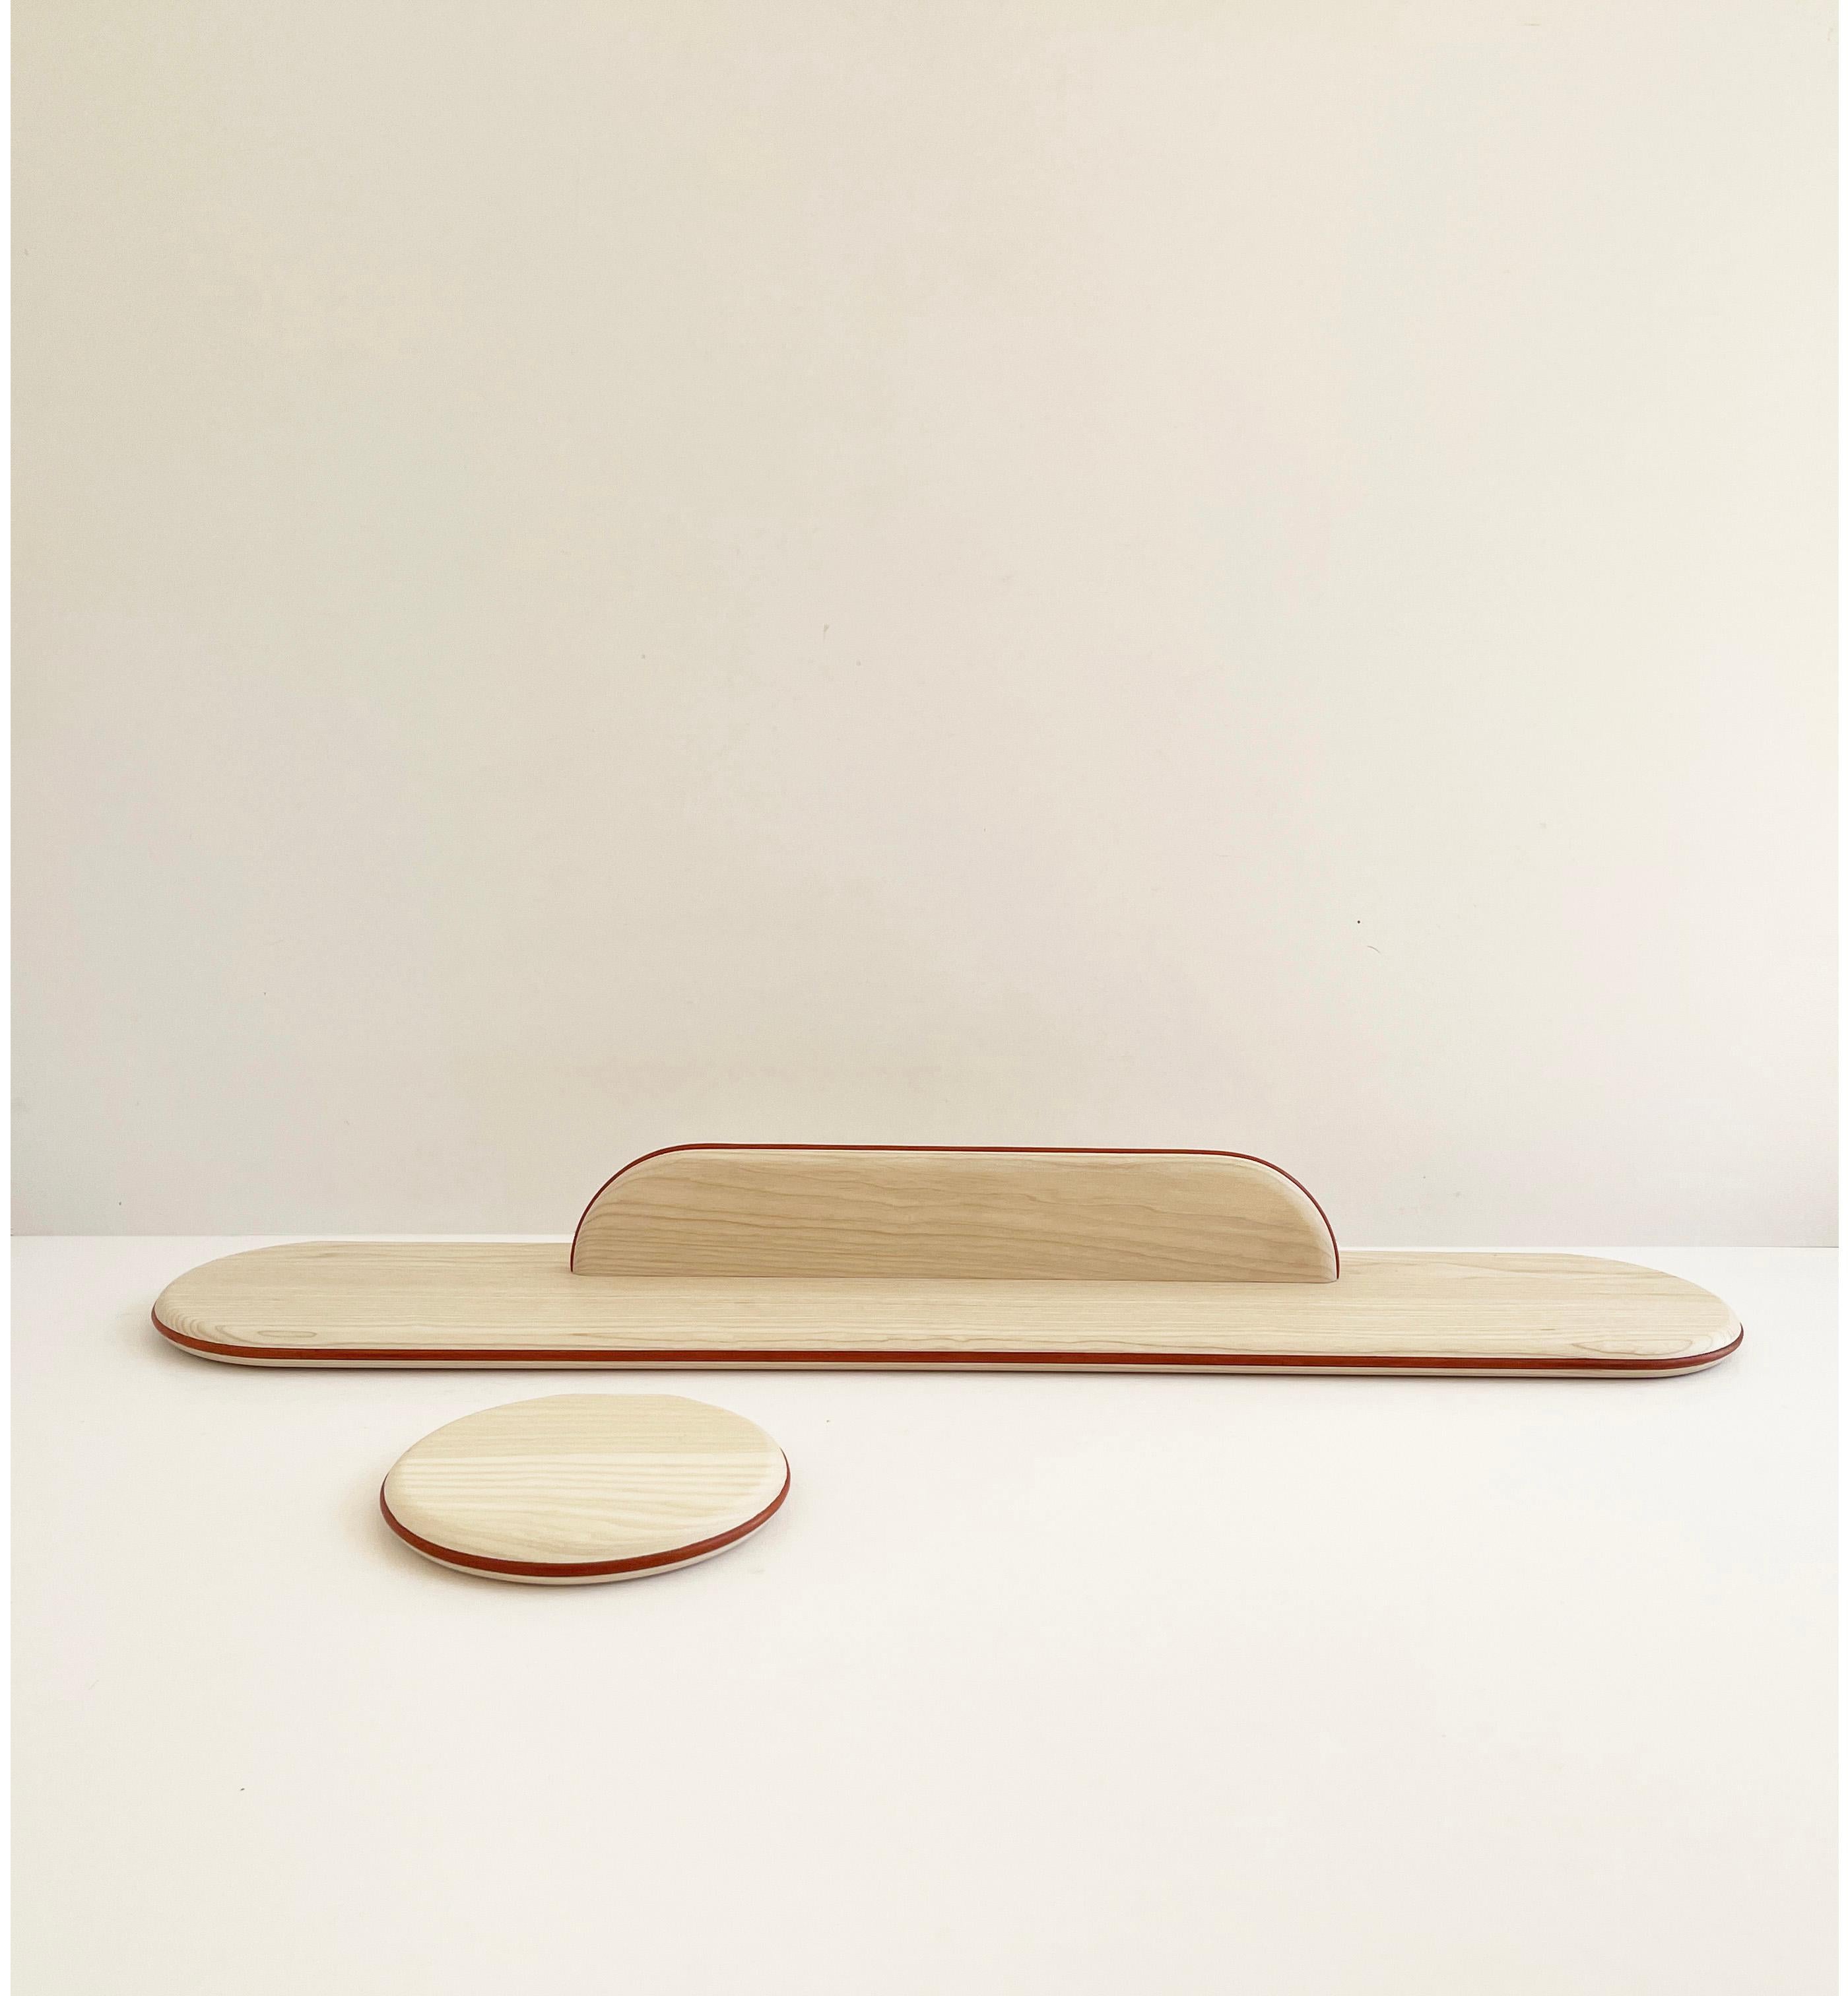 Set of Bleached Ash and Orange Leather WALY Shelves by Mademoiselle Jo
Dimensions: Vertical: D 7.5 x W 45 x H 2 cm.
Small: D 17 x W 18 x H 2 cm.
Large: D 17 x W 90 x H 2 cm.
Materials: Bleached ash and orange leather.

Available in two wood colors.